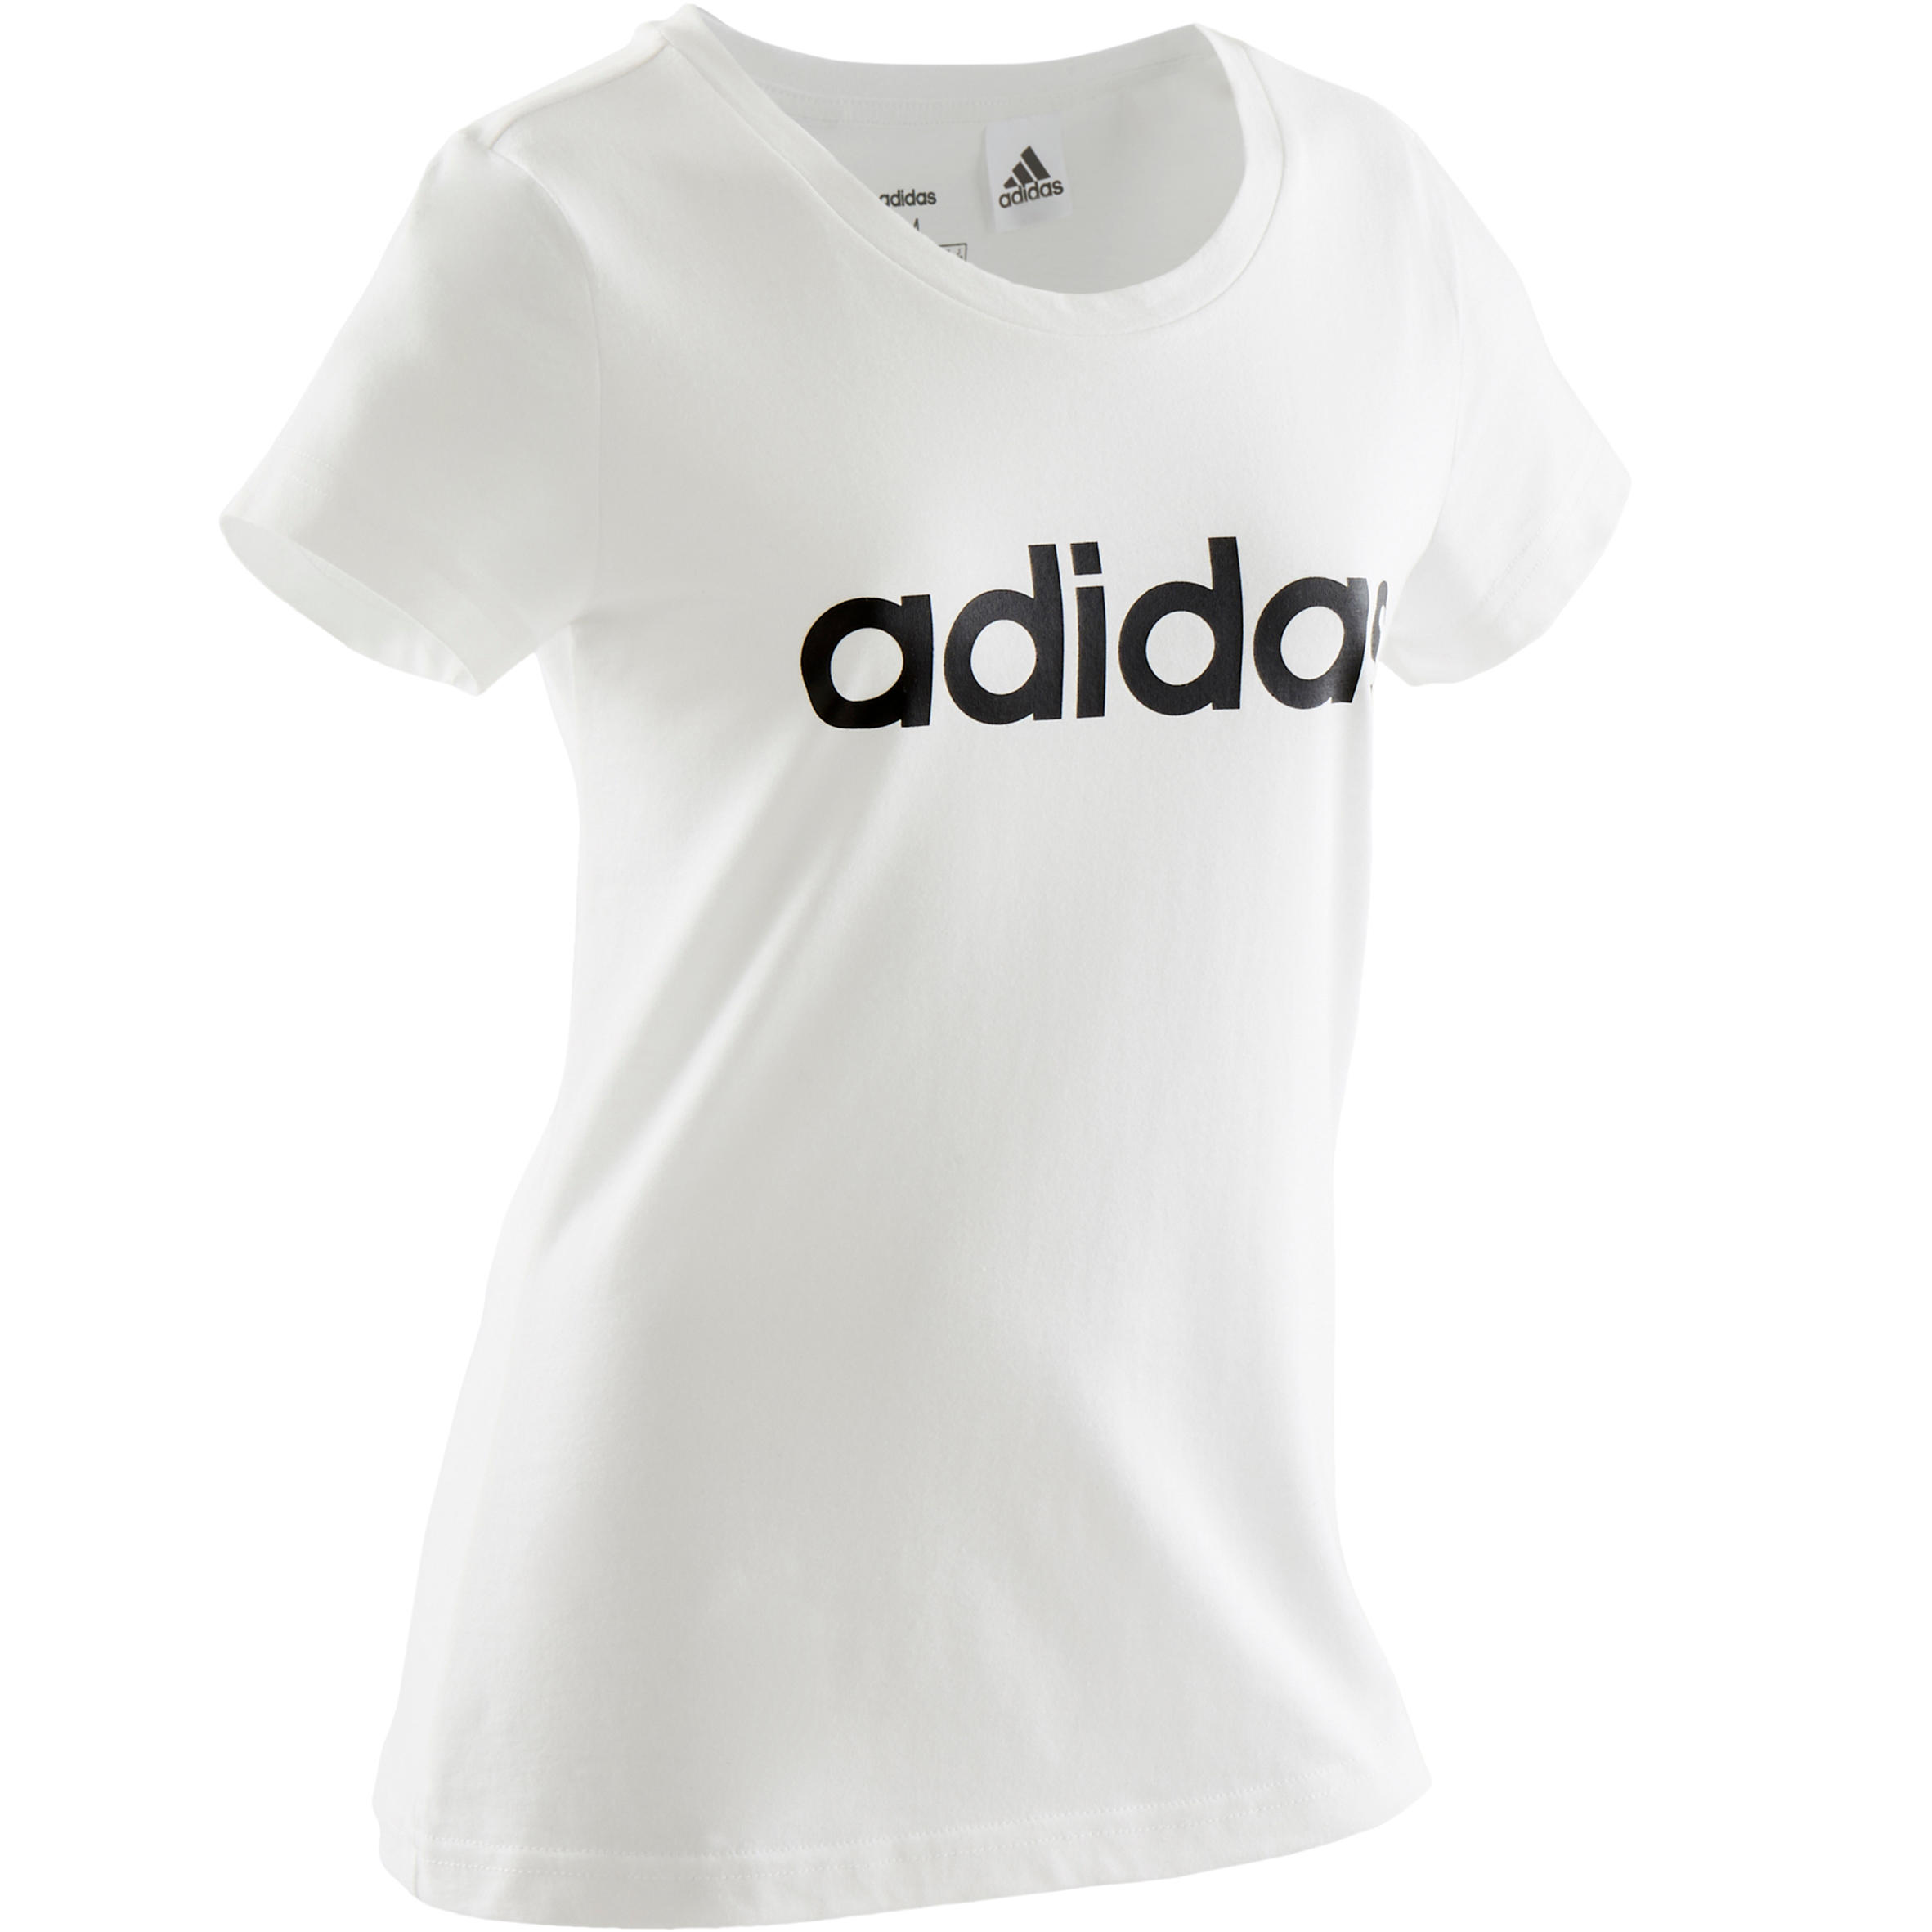 Girls' T-Shirt - White with Contrasting Black Logo on the Chest ADIDAS -  Decathlon